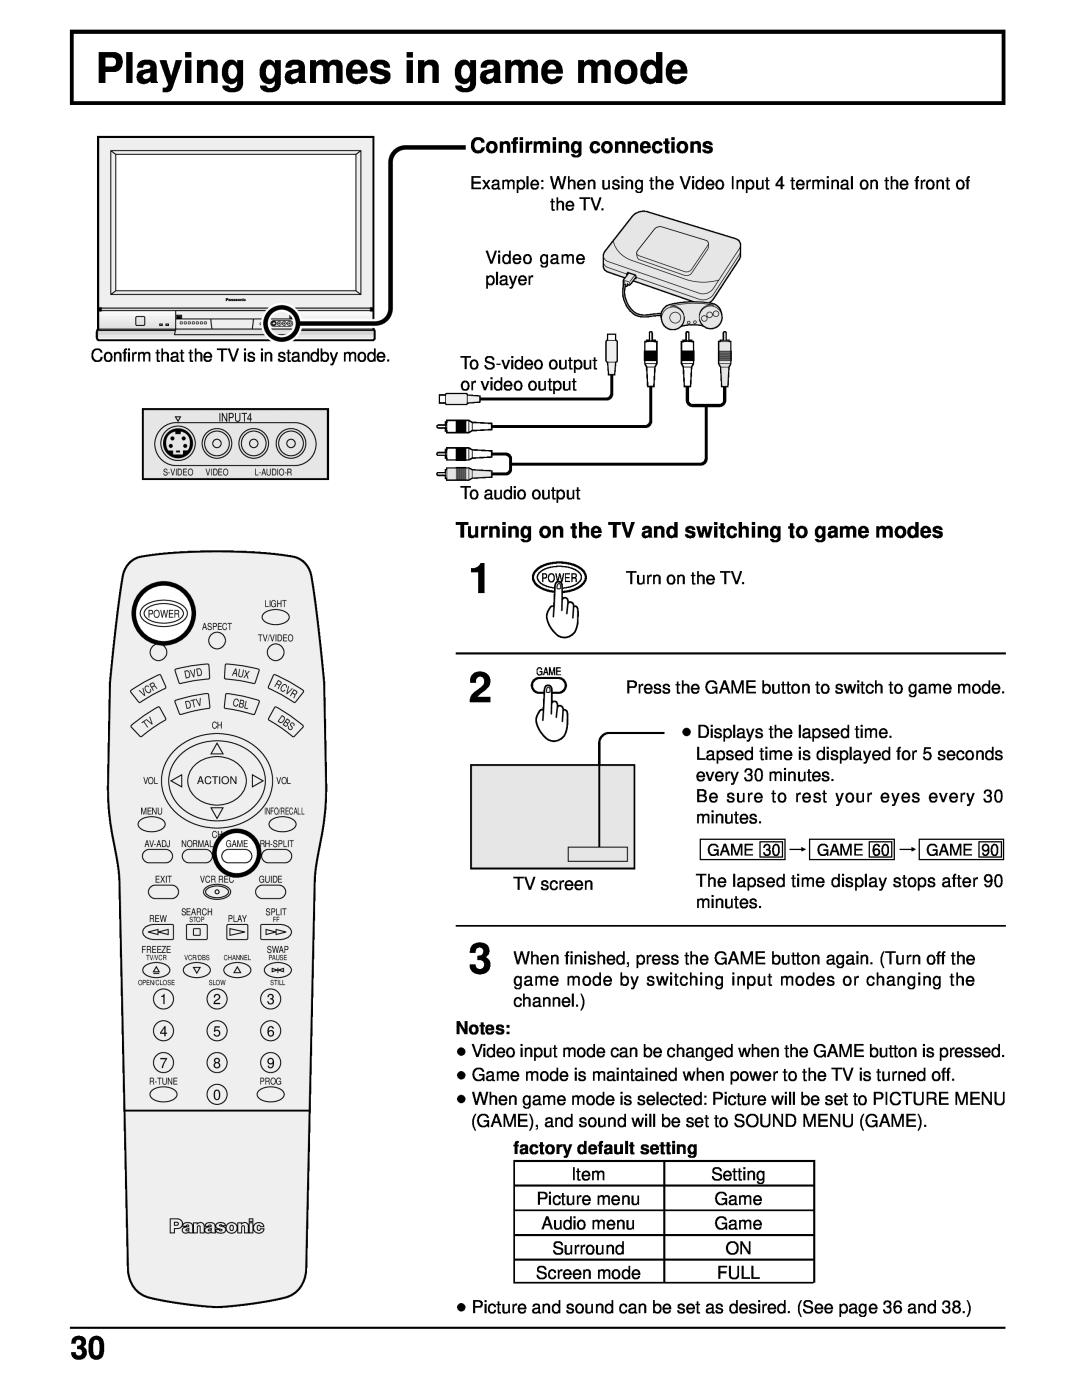 Panasonic CT 34WX50 Playing games in game mode, Turning on the TV and switching to game modes, Confirming connections 